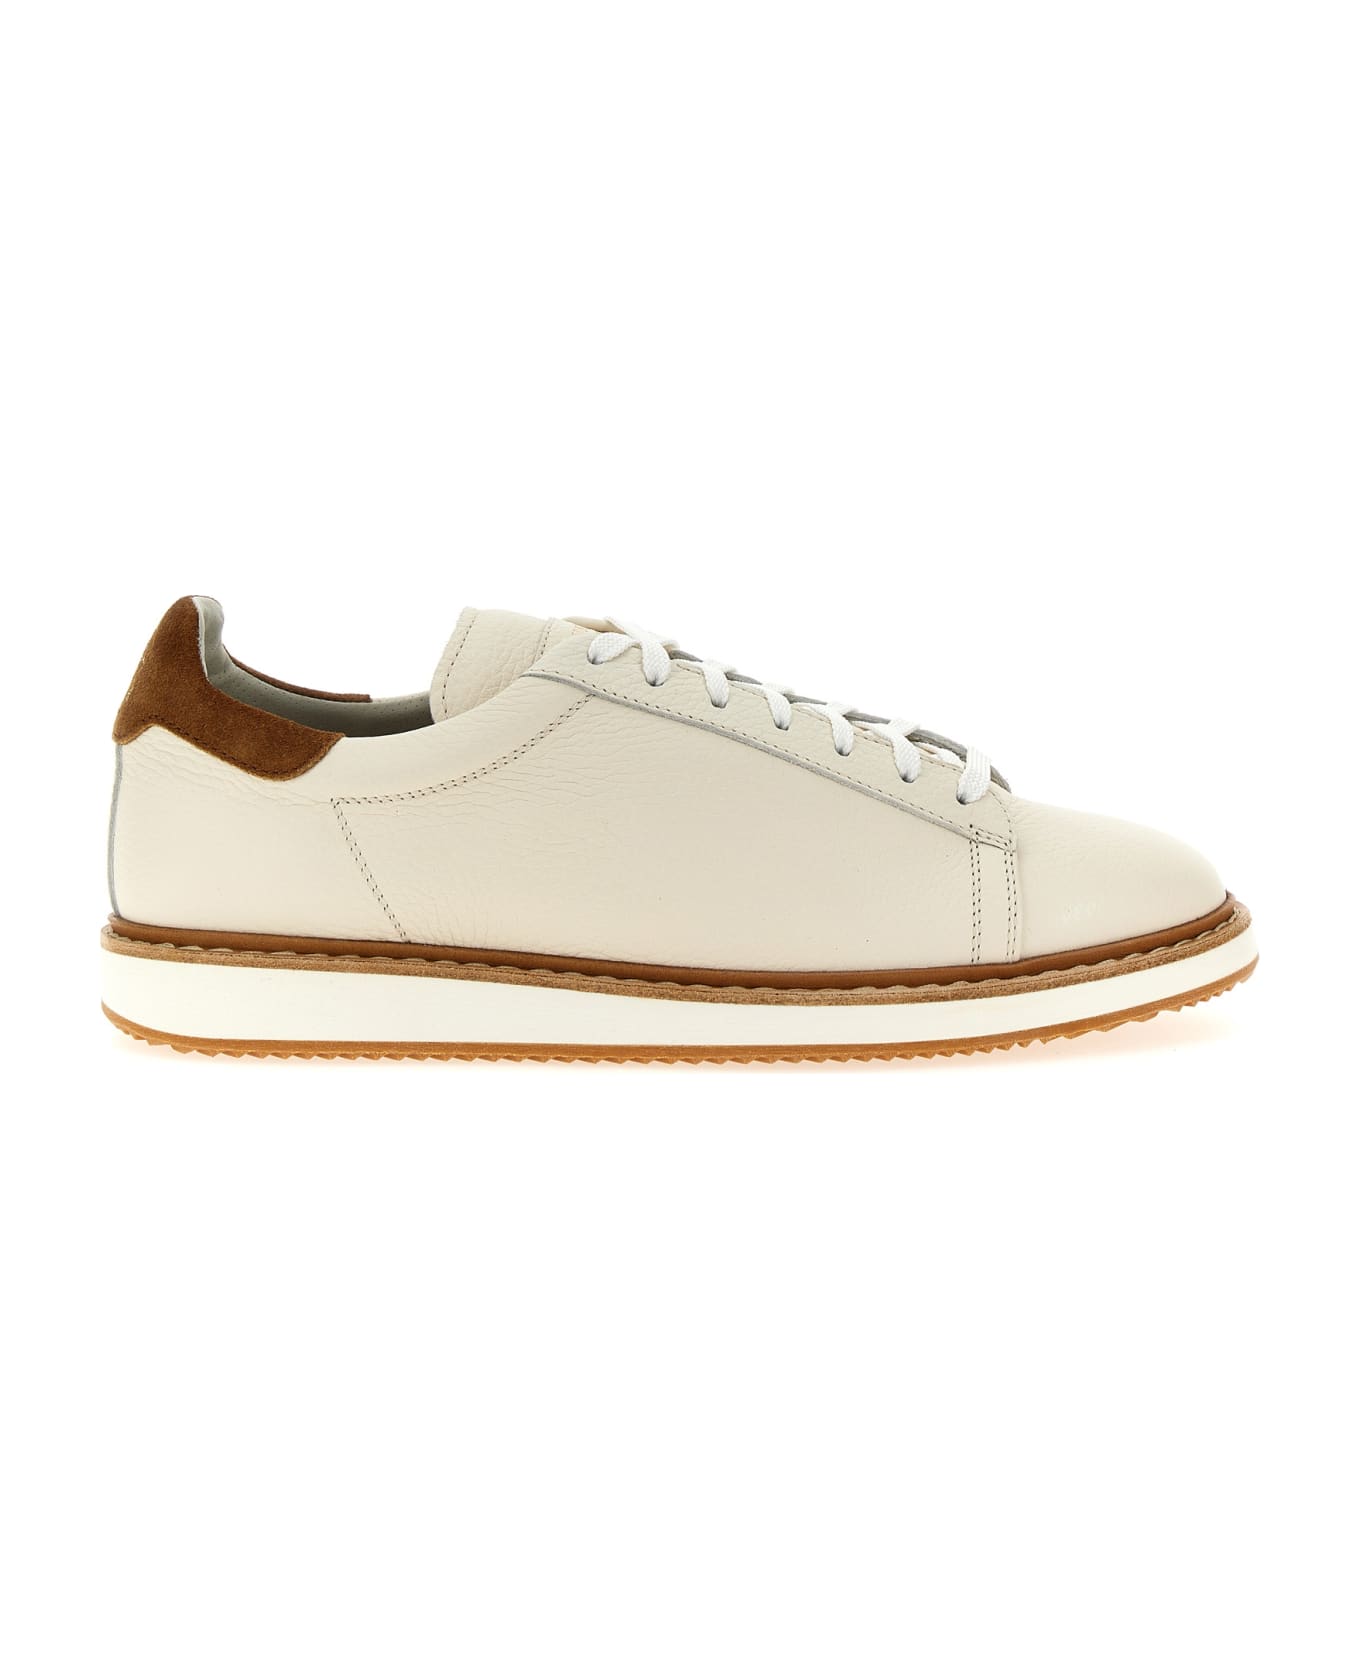 Brunello Cucinelli Suede Runner Sneaker Shoe With Wool Inserts - White